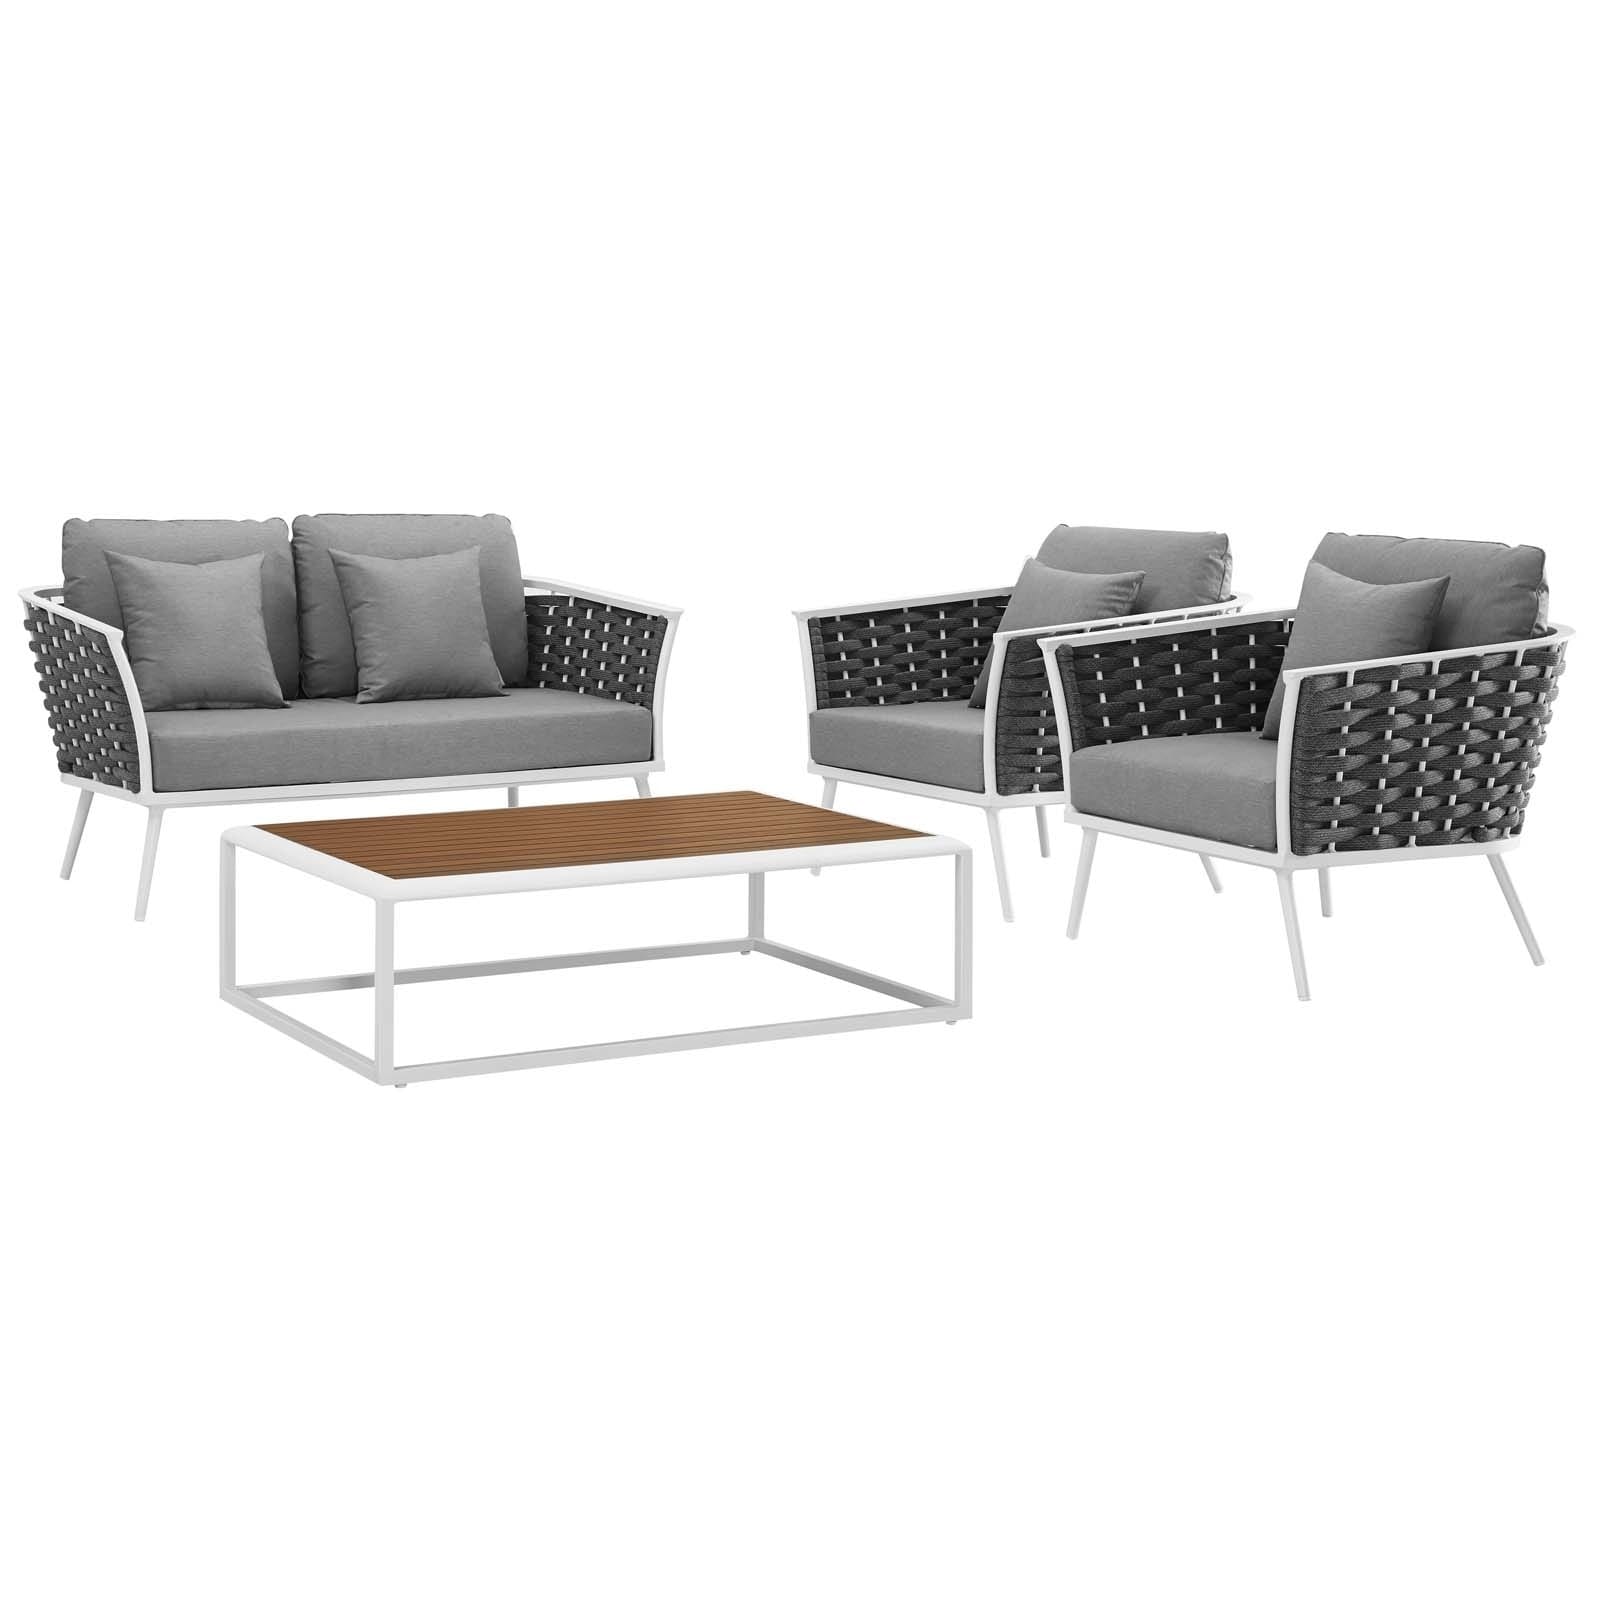 Stance 4 Piece Outdoor Patio Aluminum Sectional Sofa Set - N/a